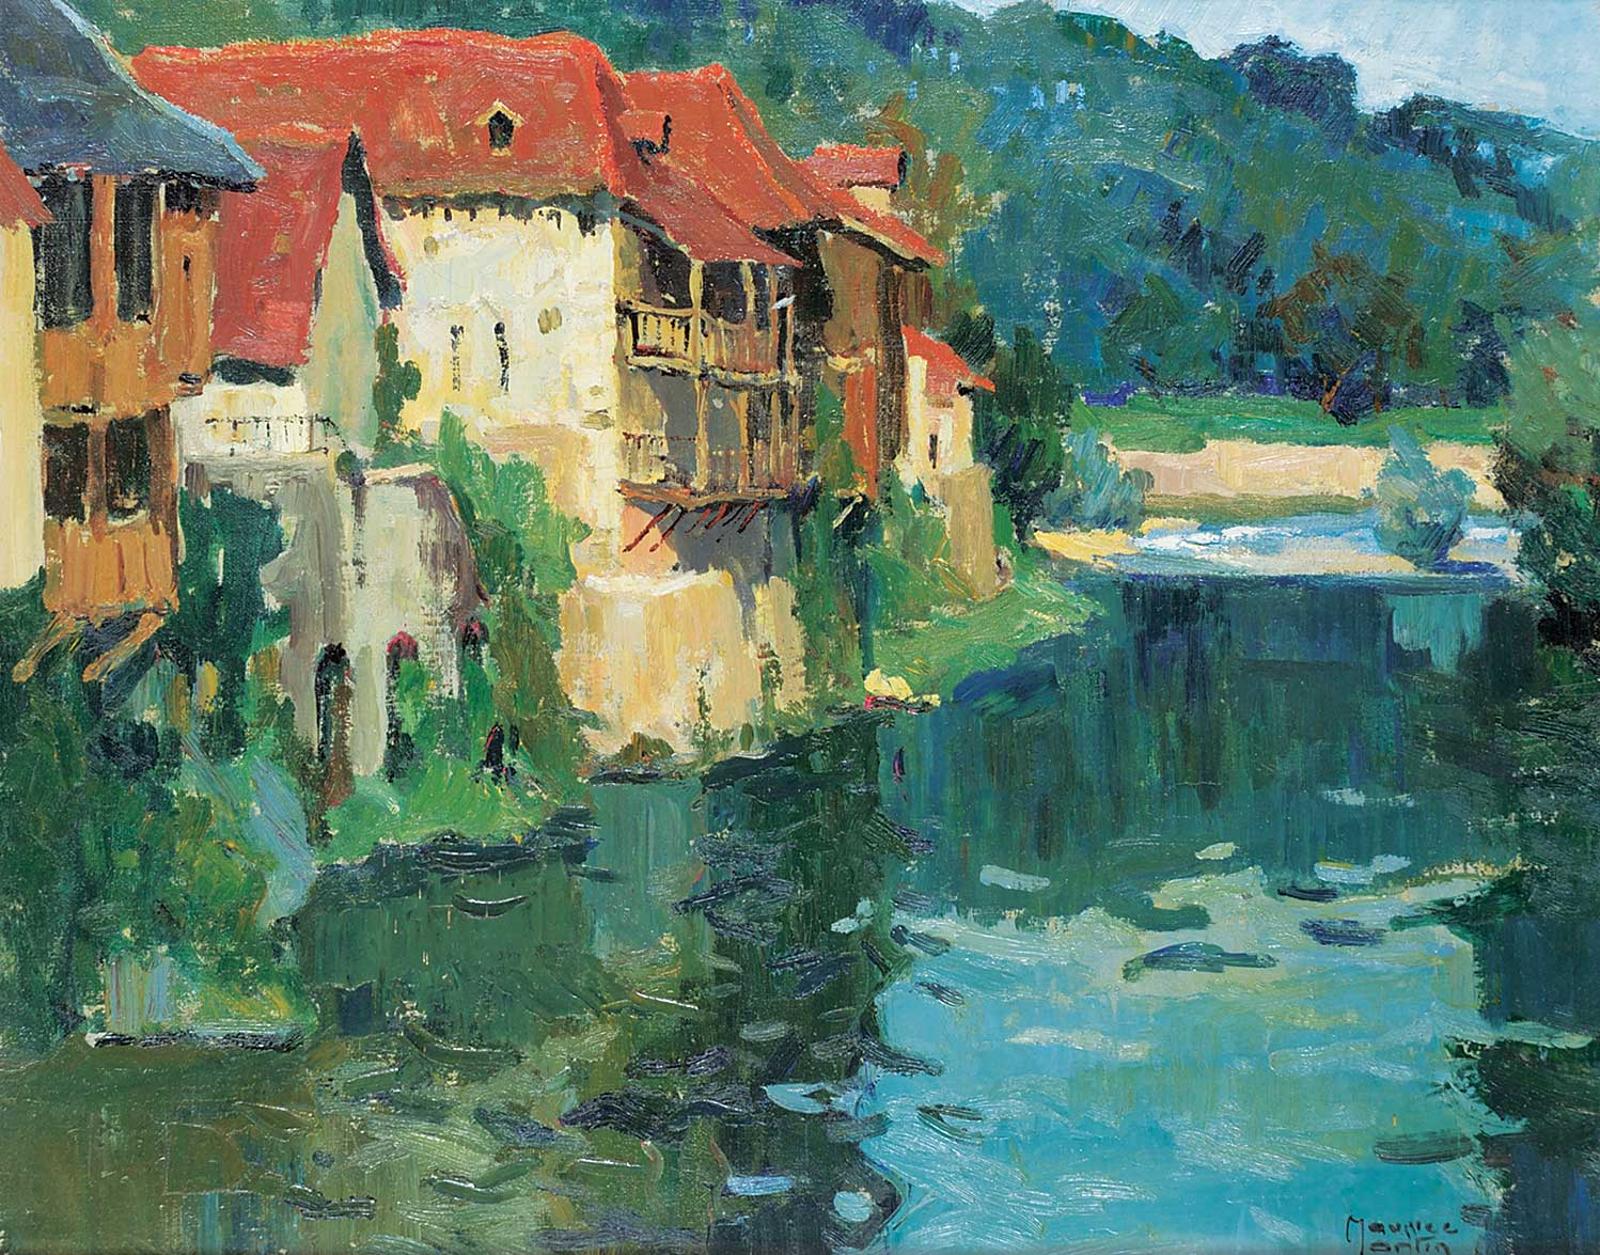 Maurice Martin - Untitled - Along the River